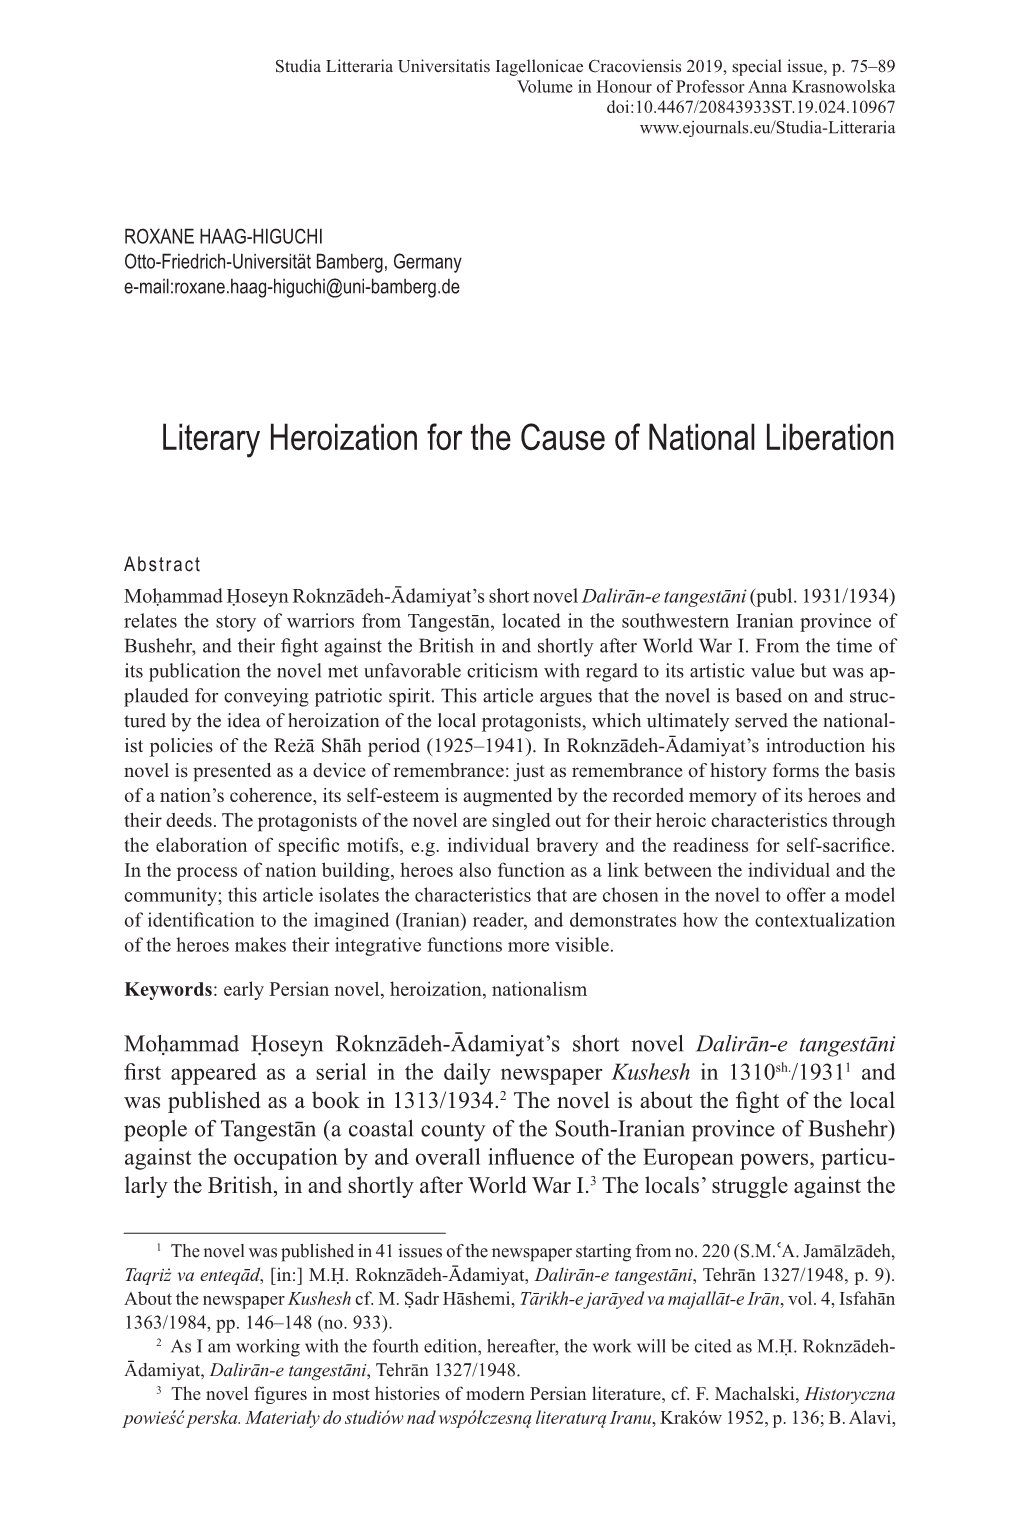 Literary Heroization for the Cause of National Liberation